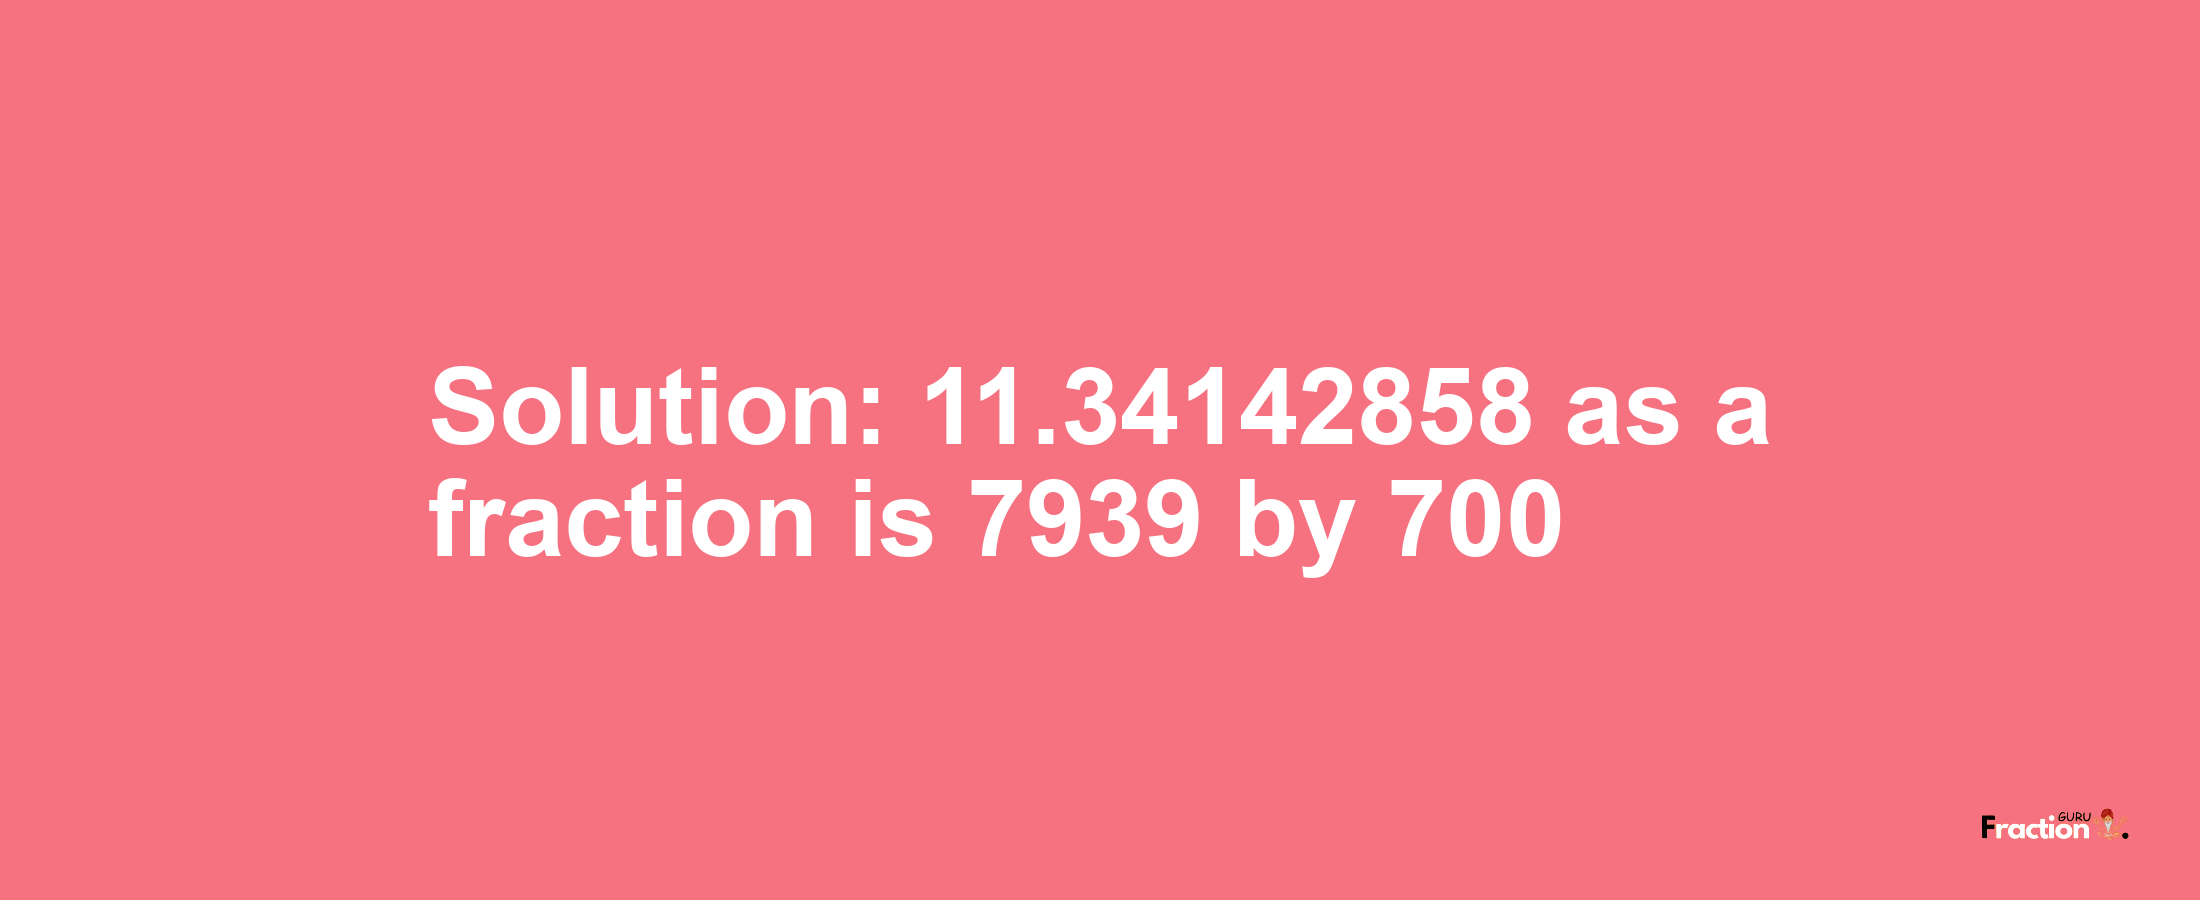 Solution:11.34142858 as a fraction is 7939/700